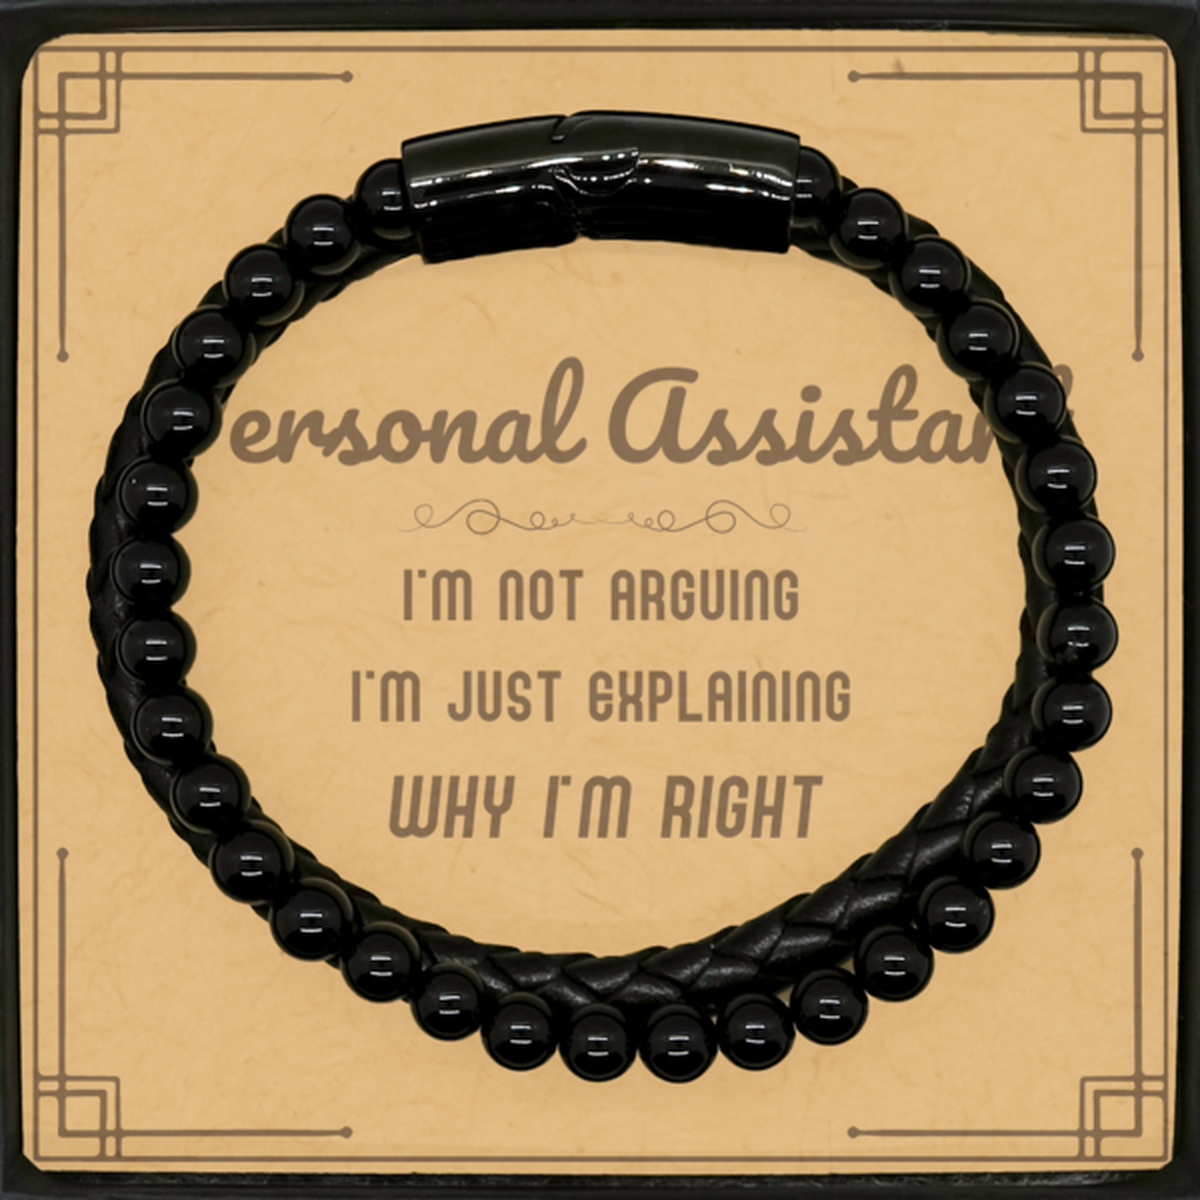 Personal Assistant I'm not Arguing. I'm Just Explaining Why I'm RIGHT Stone Leather Bracelets, Funny Saying Quote Personal Assistant Gifts For Personal Assistant Message Card Graduation Birthday Christmas Gifts for Men Women Coworker